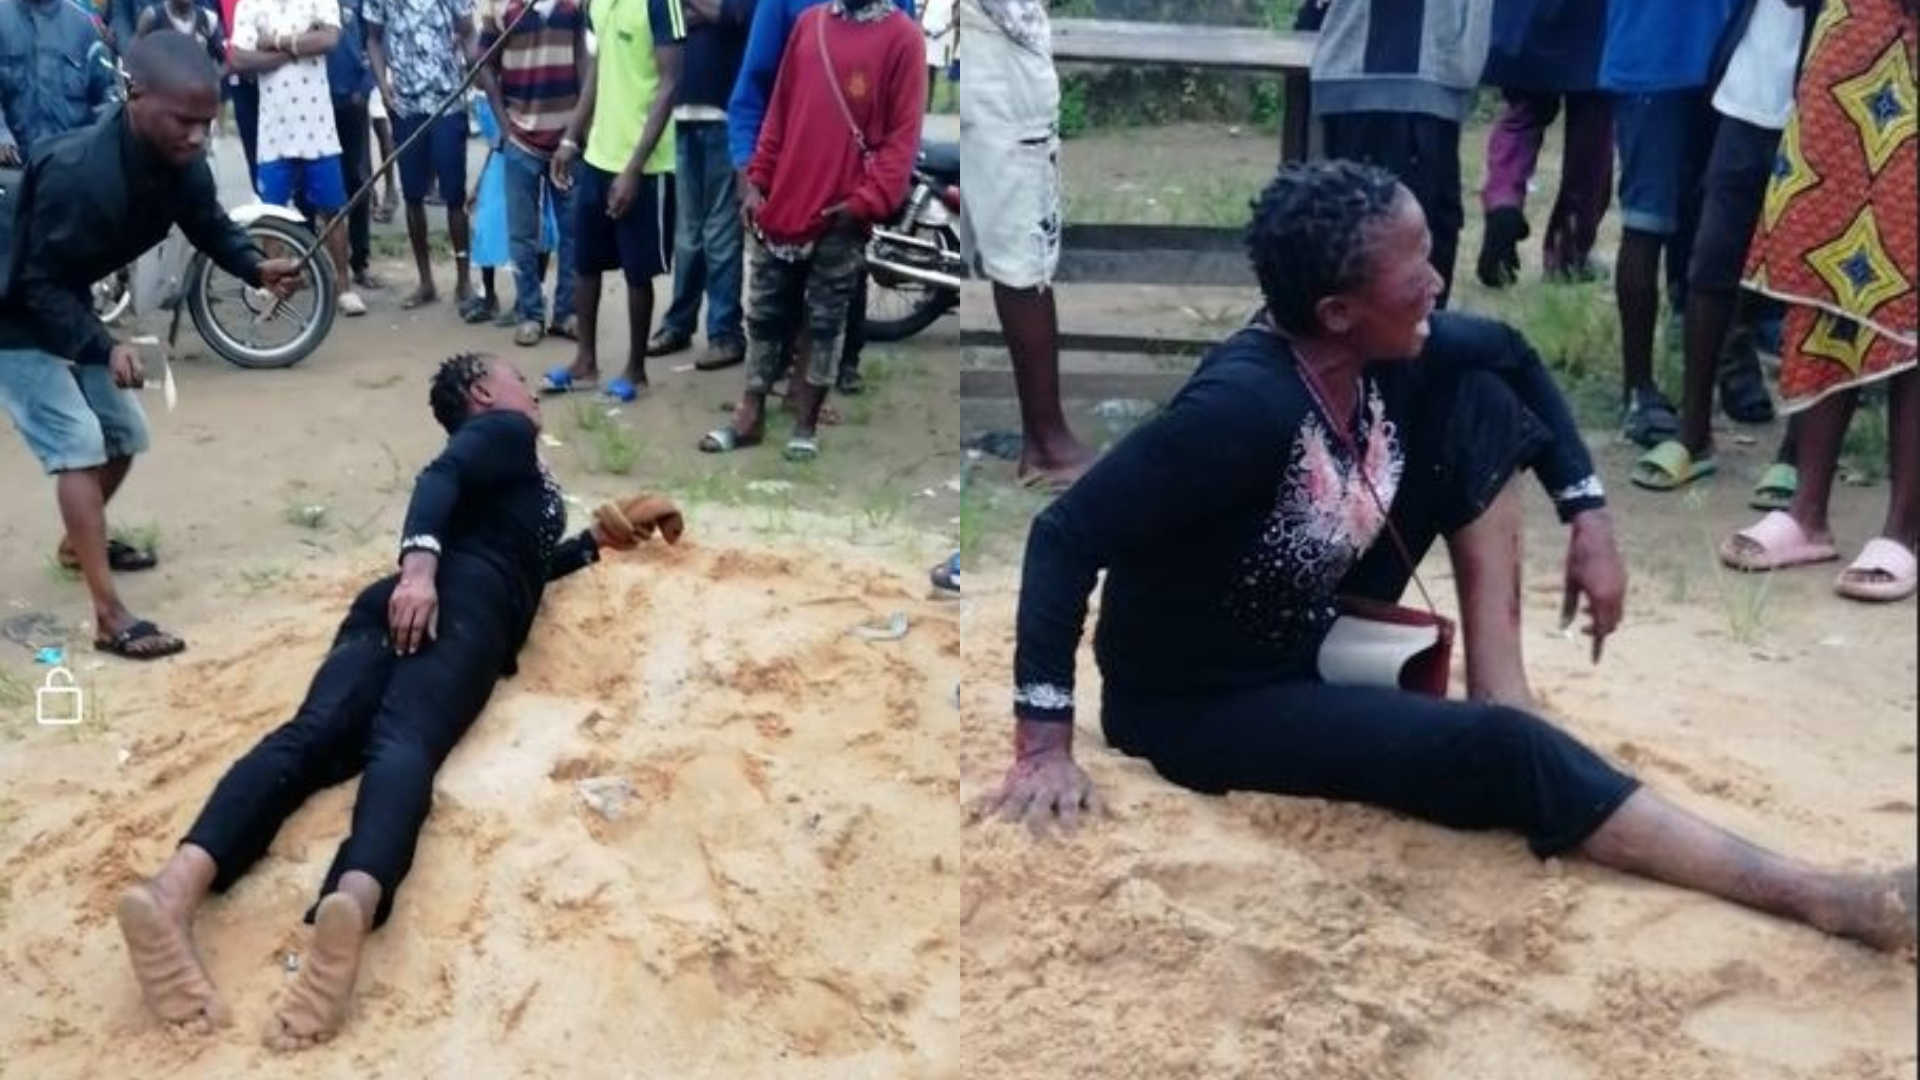 Woman Flogged For Allegedly Stealing Three Bunches Of Plantain In Akwa Ibom